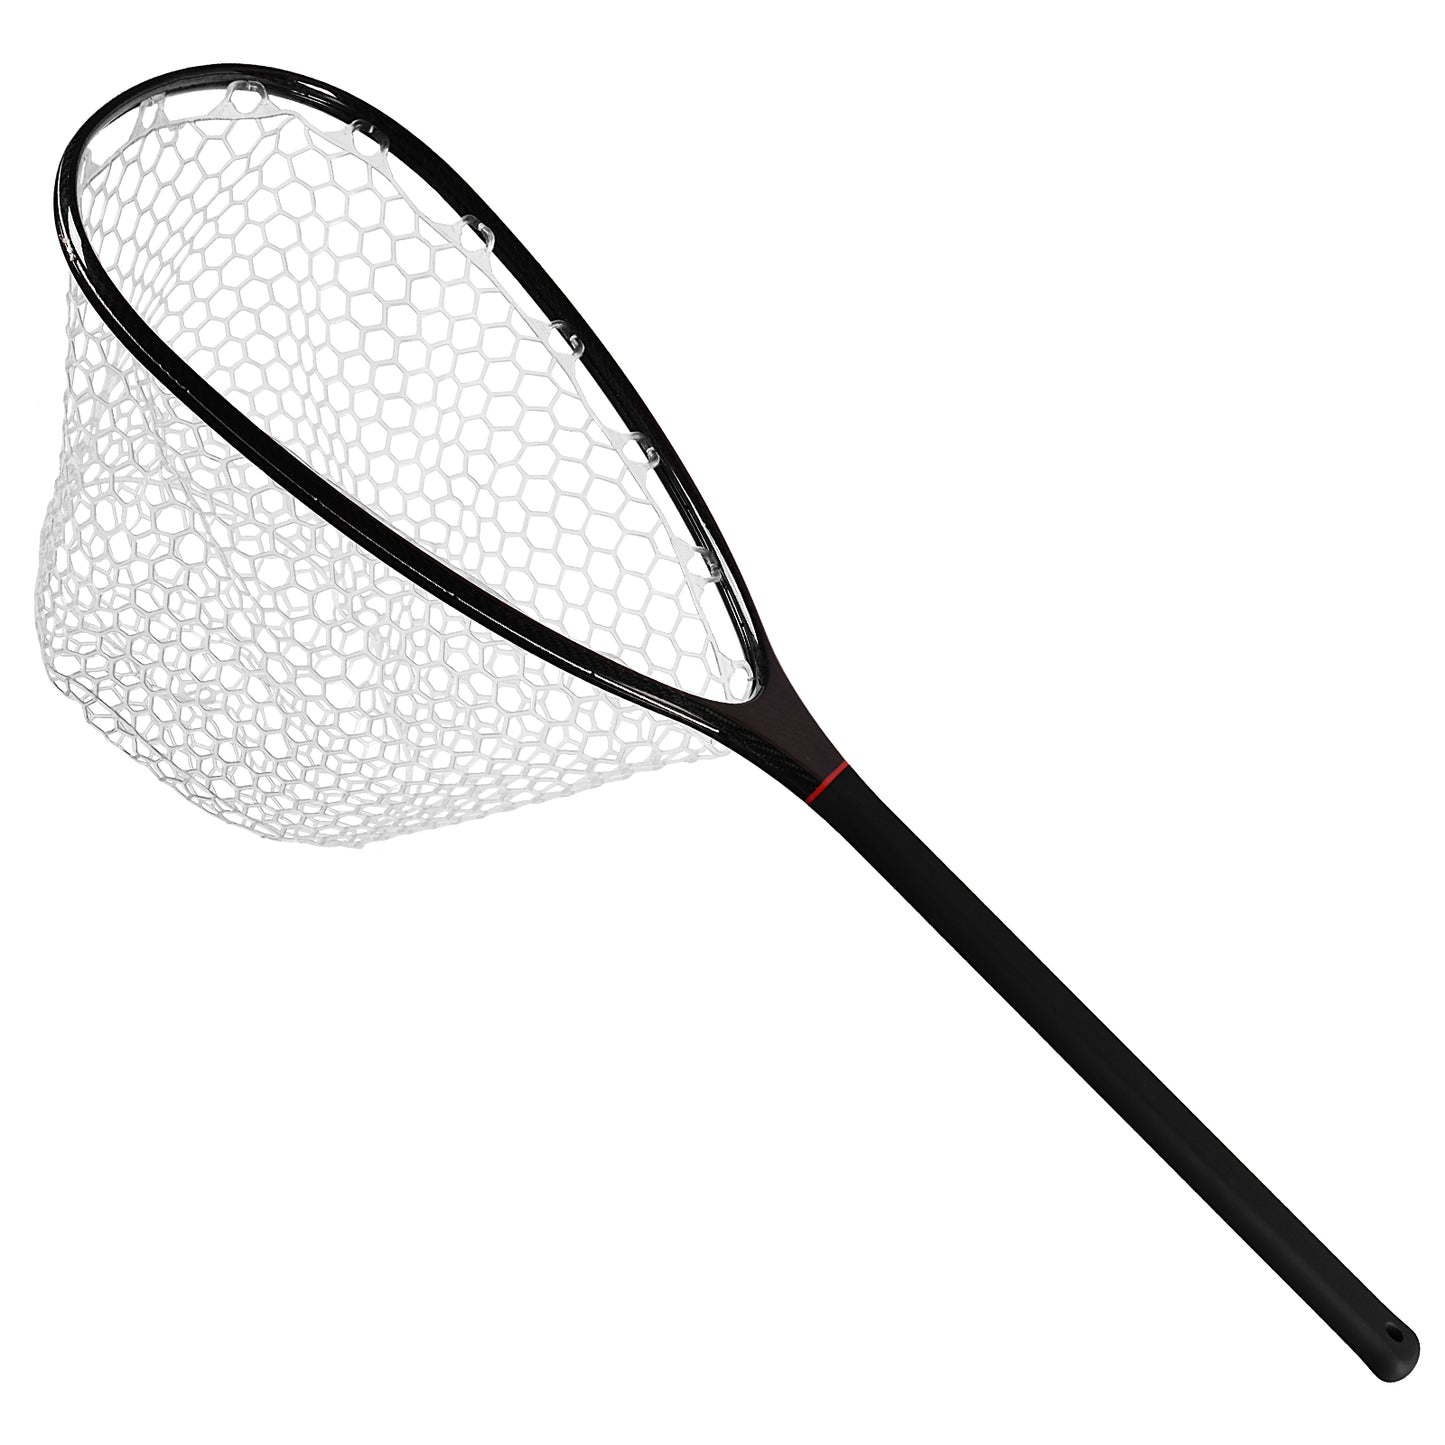 SF Fly Fishing Landing Silicone Rubber Mesh Small Hole